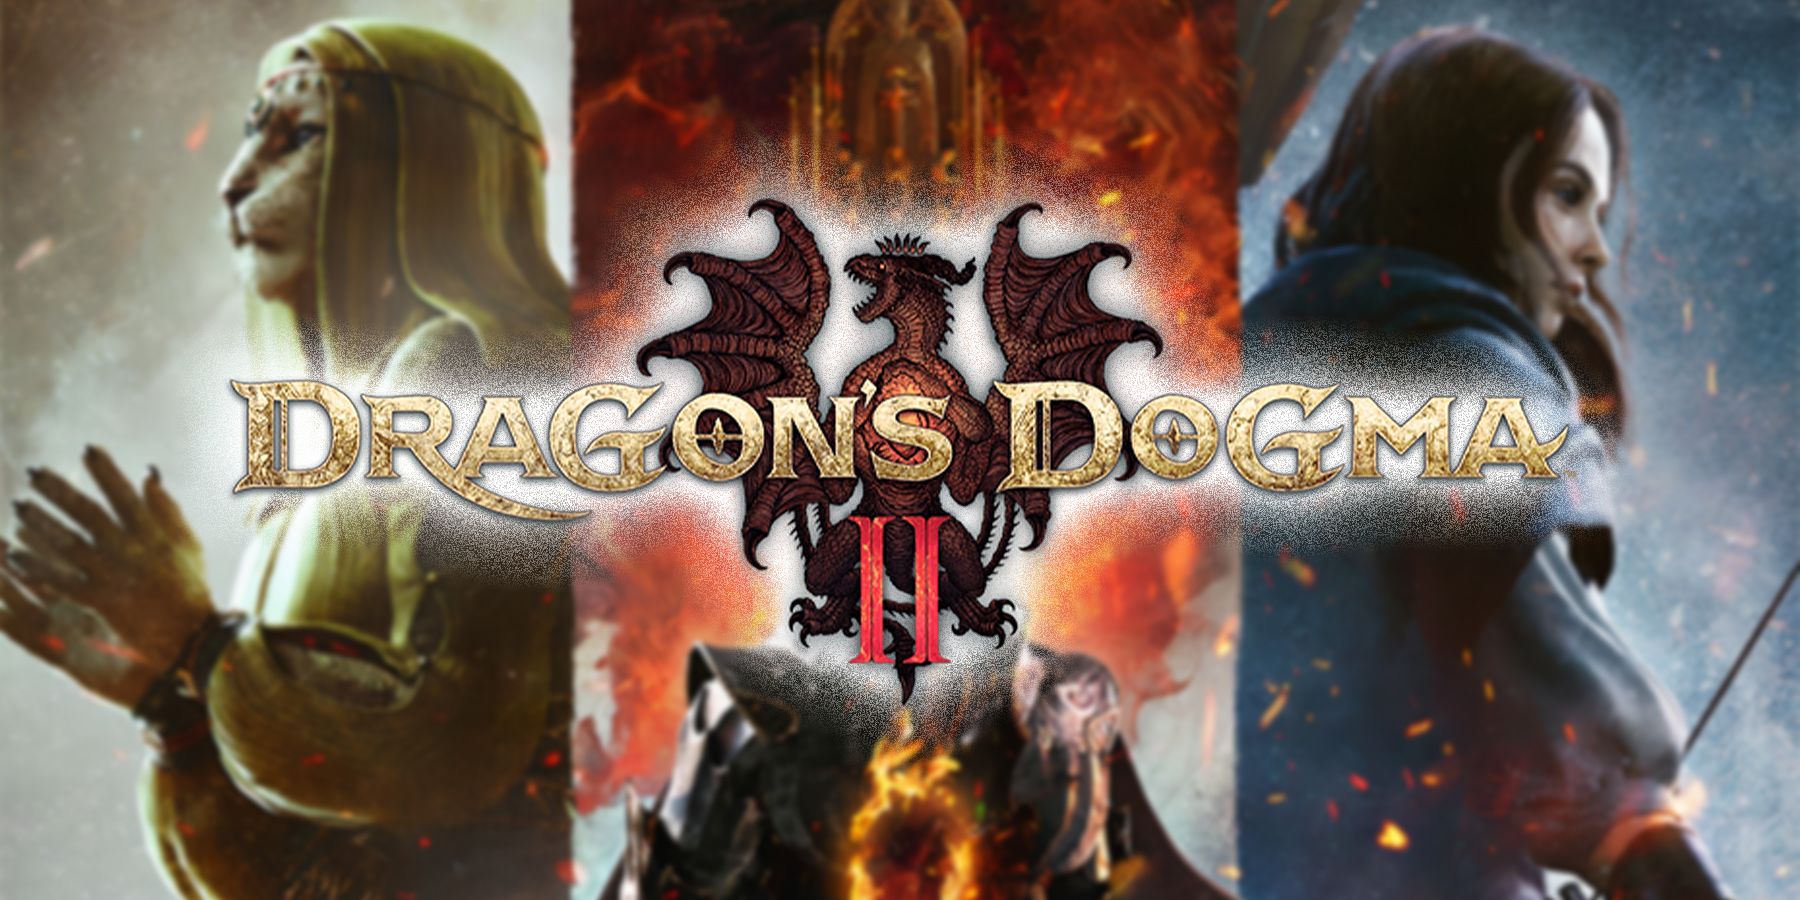 La5t Game You Fini5hed And Your Thought5 - Page 30 Dragon-s-dogma-2-key-art-with-logo-in-front-of-it